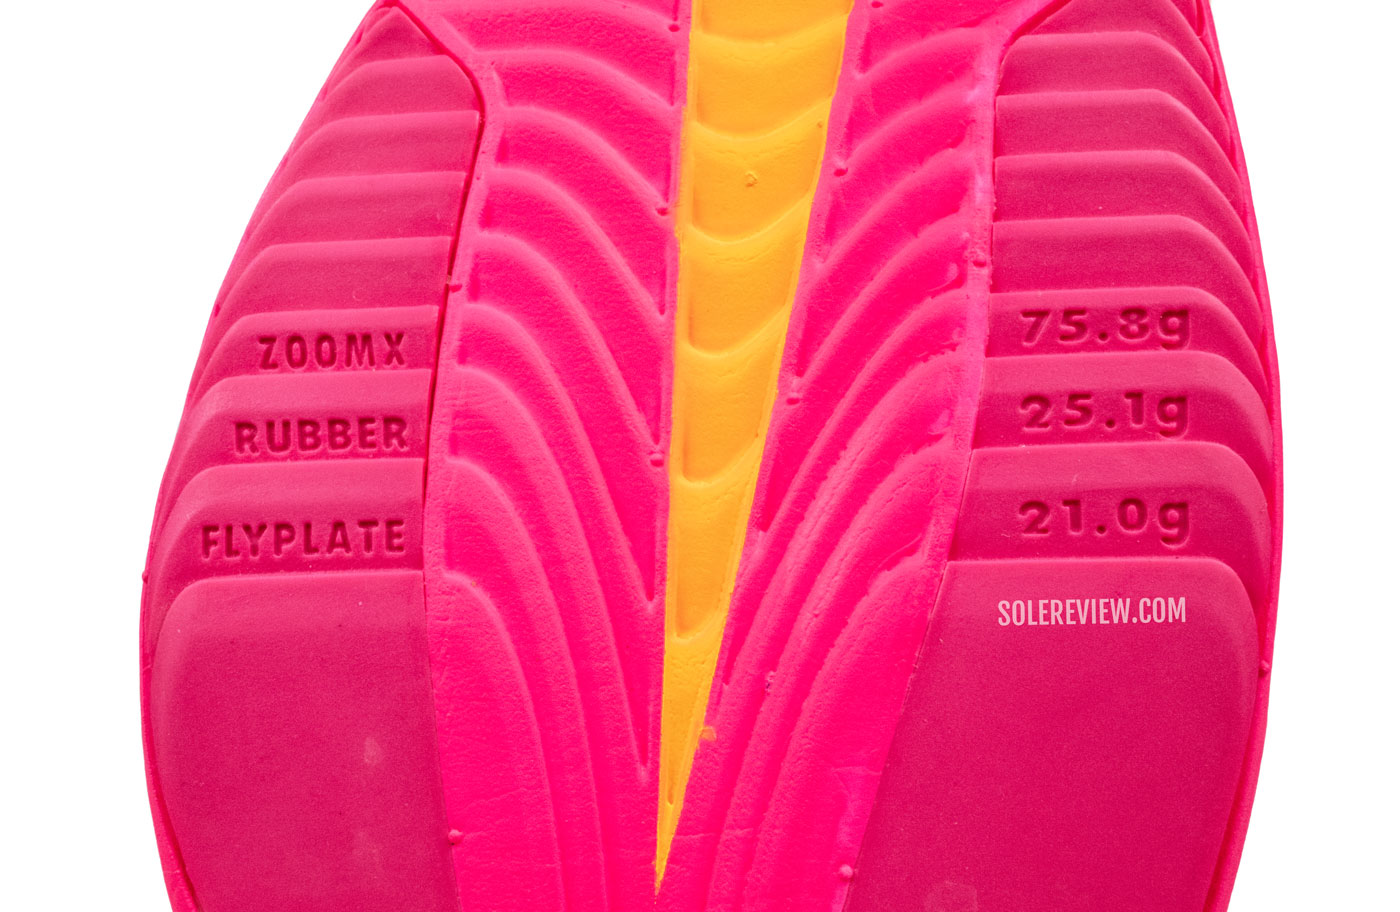 The outsole rubber of the Nike Vaporfly 3.